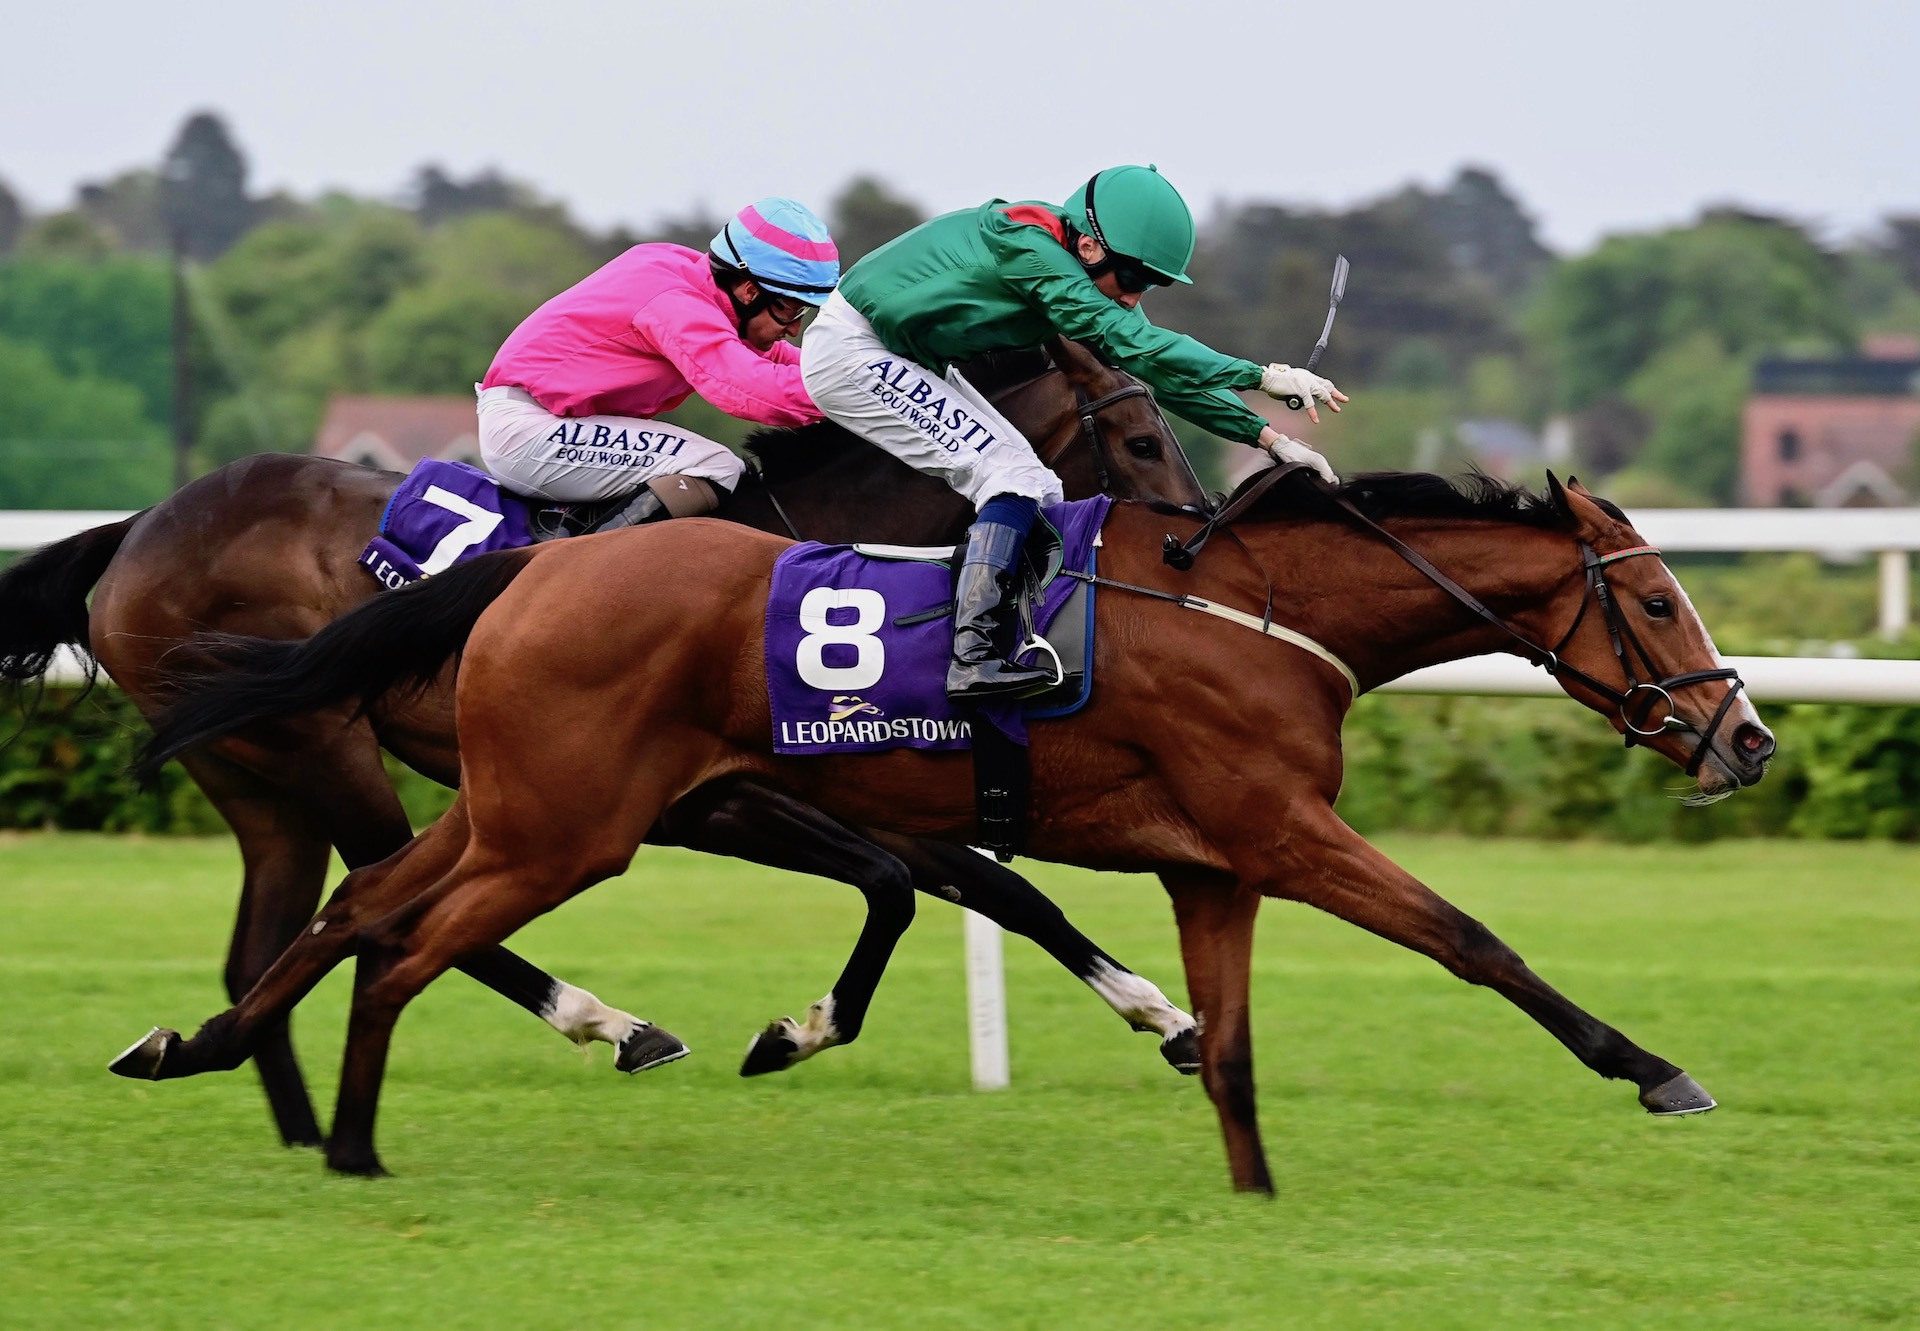 Shamida (Australia) Wins The Group 3 Stanerra Stakes At Leopardstown